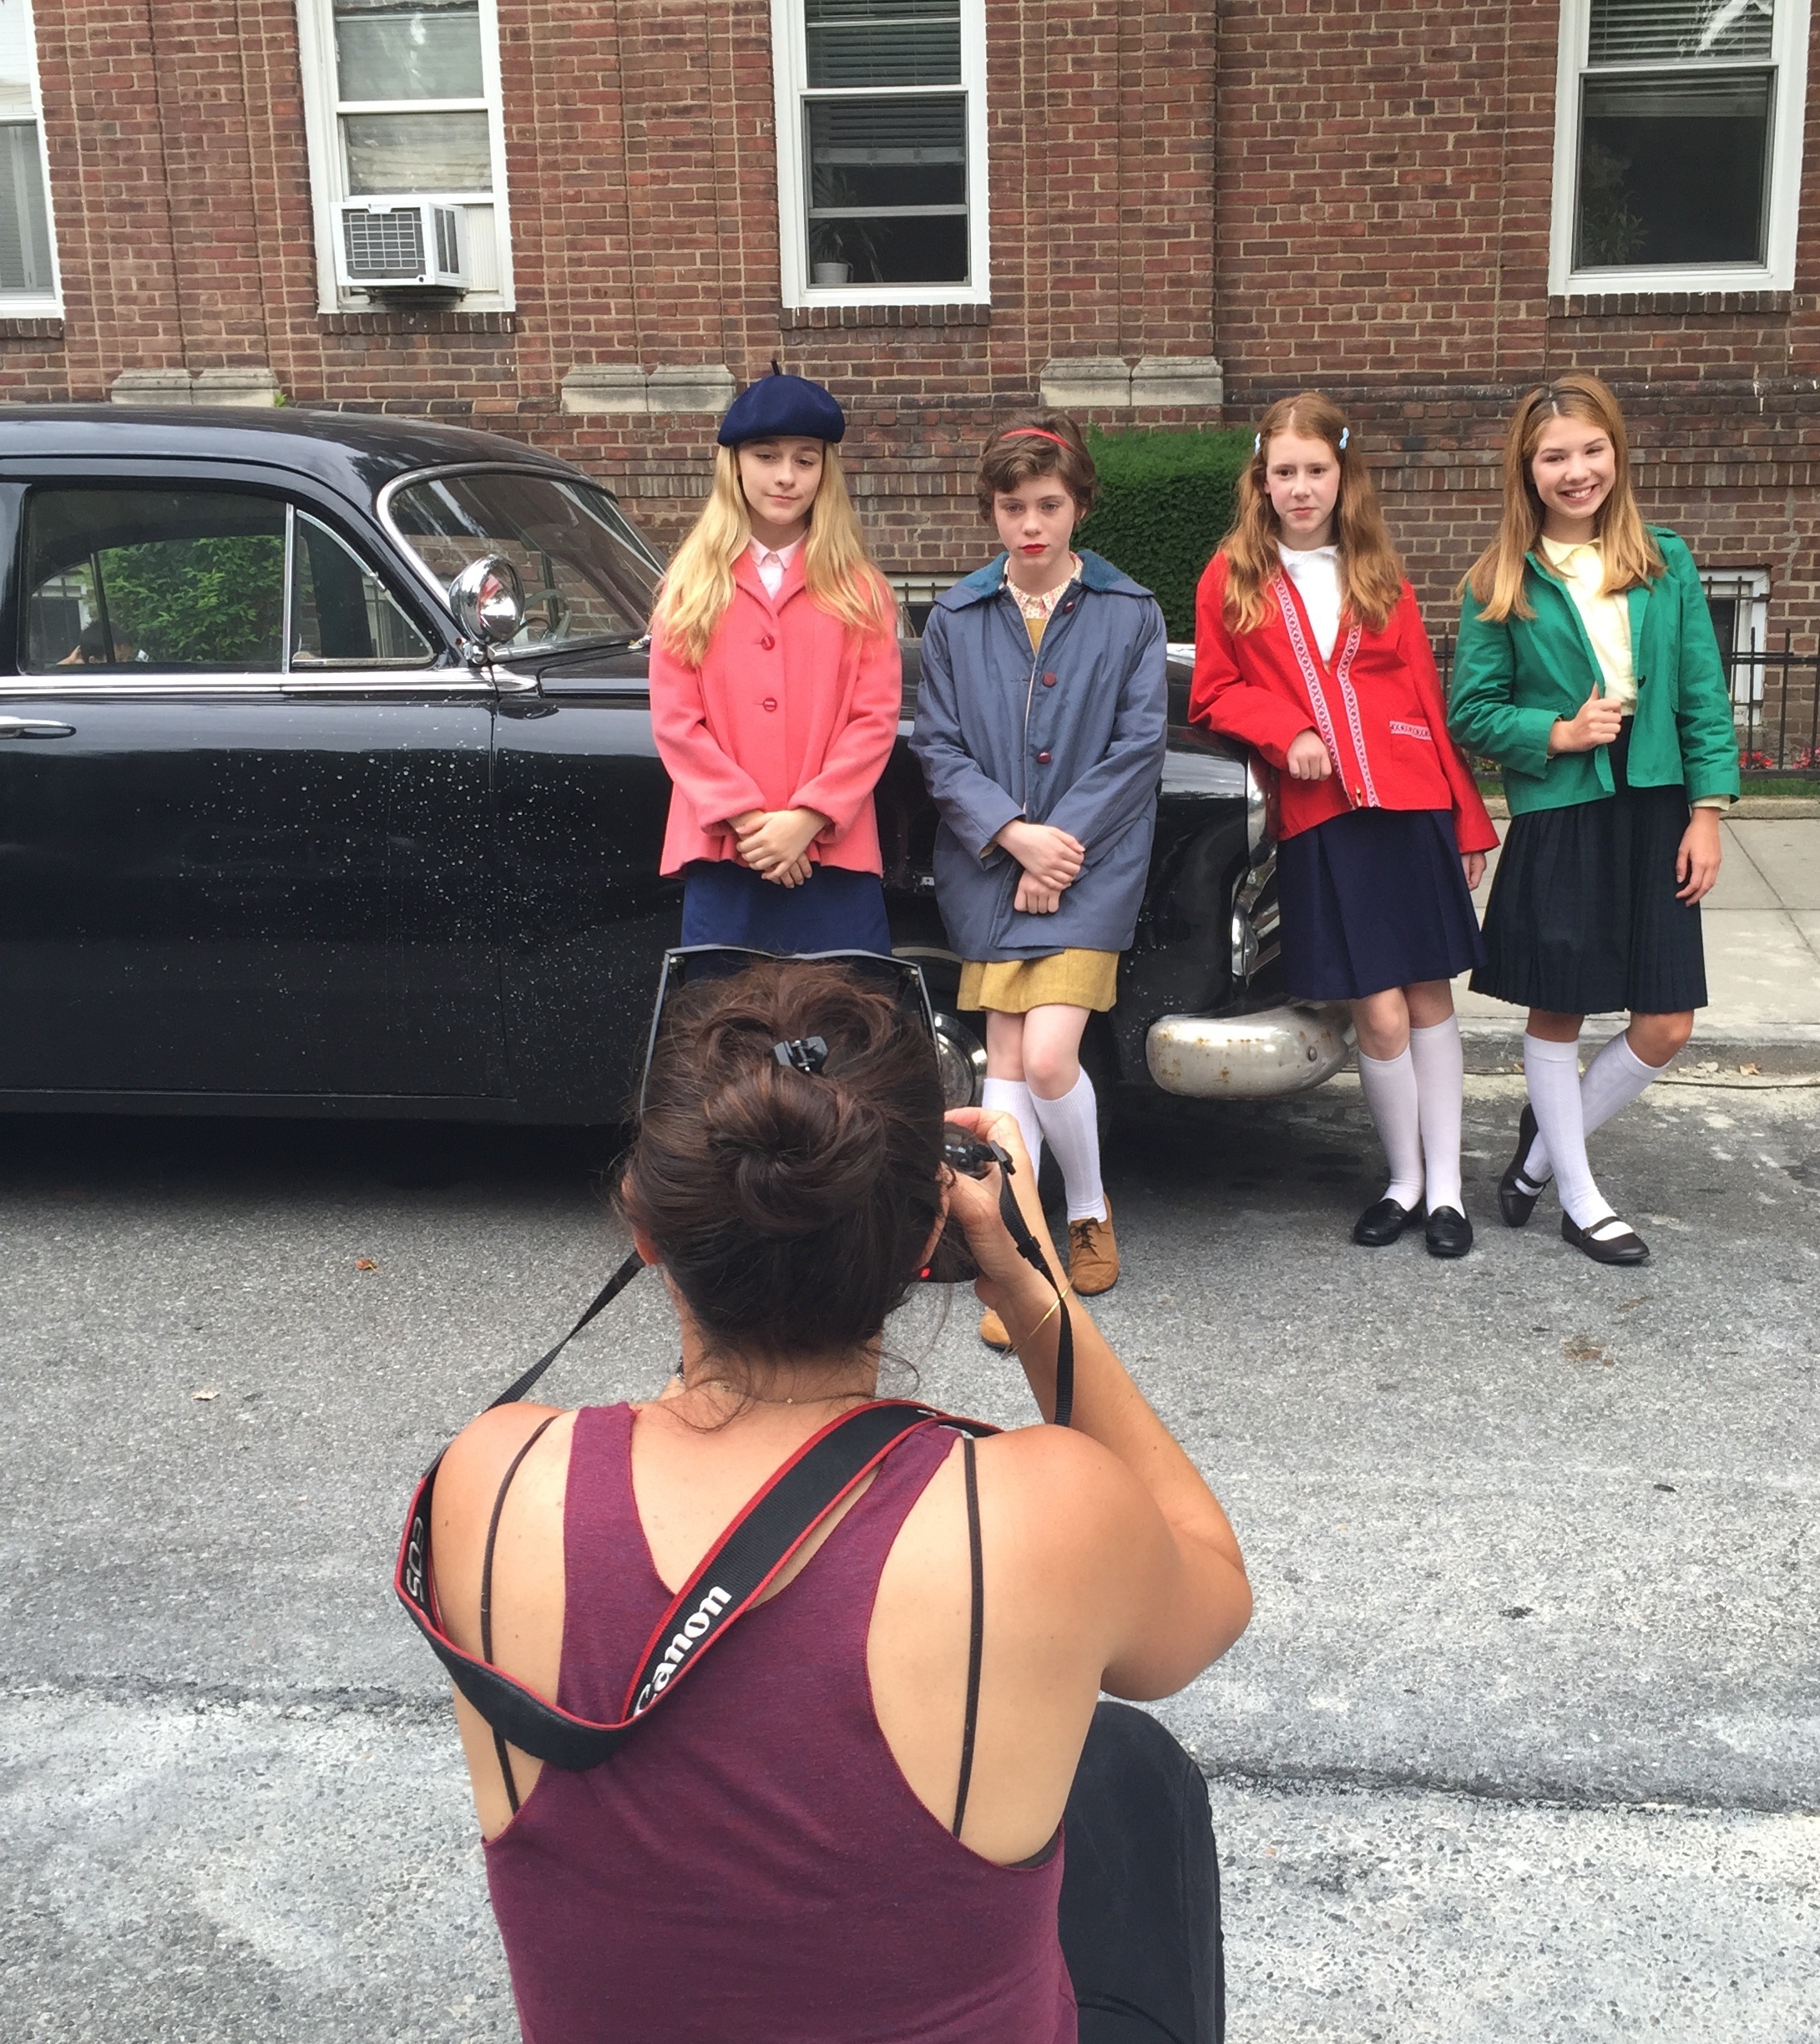 Booch O'Connell on the set of Puk Grasten's feature film '37' with Sophia Caruso, Sophia Lillis, and Jane Shearin.